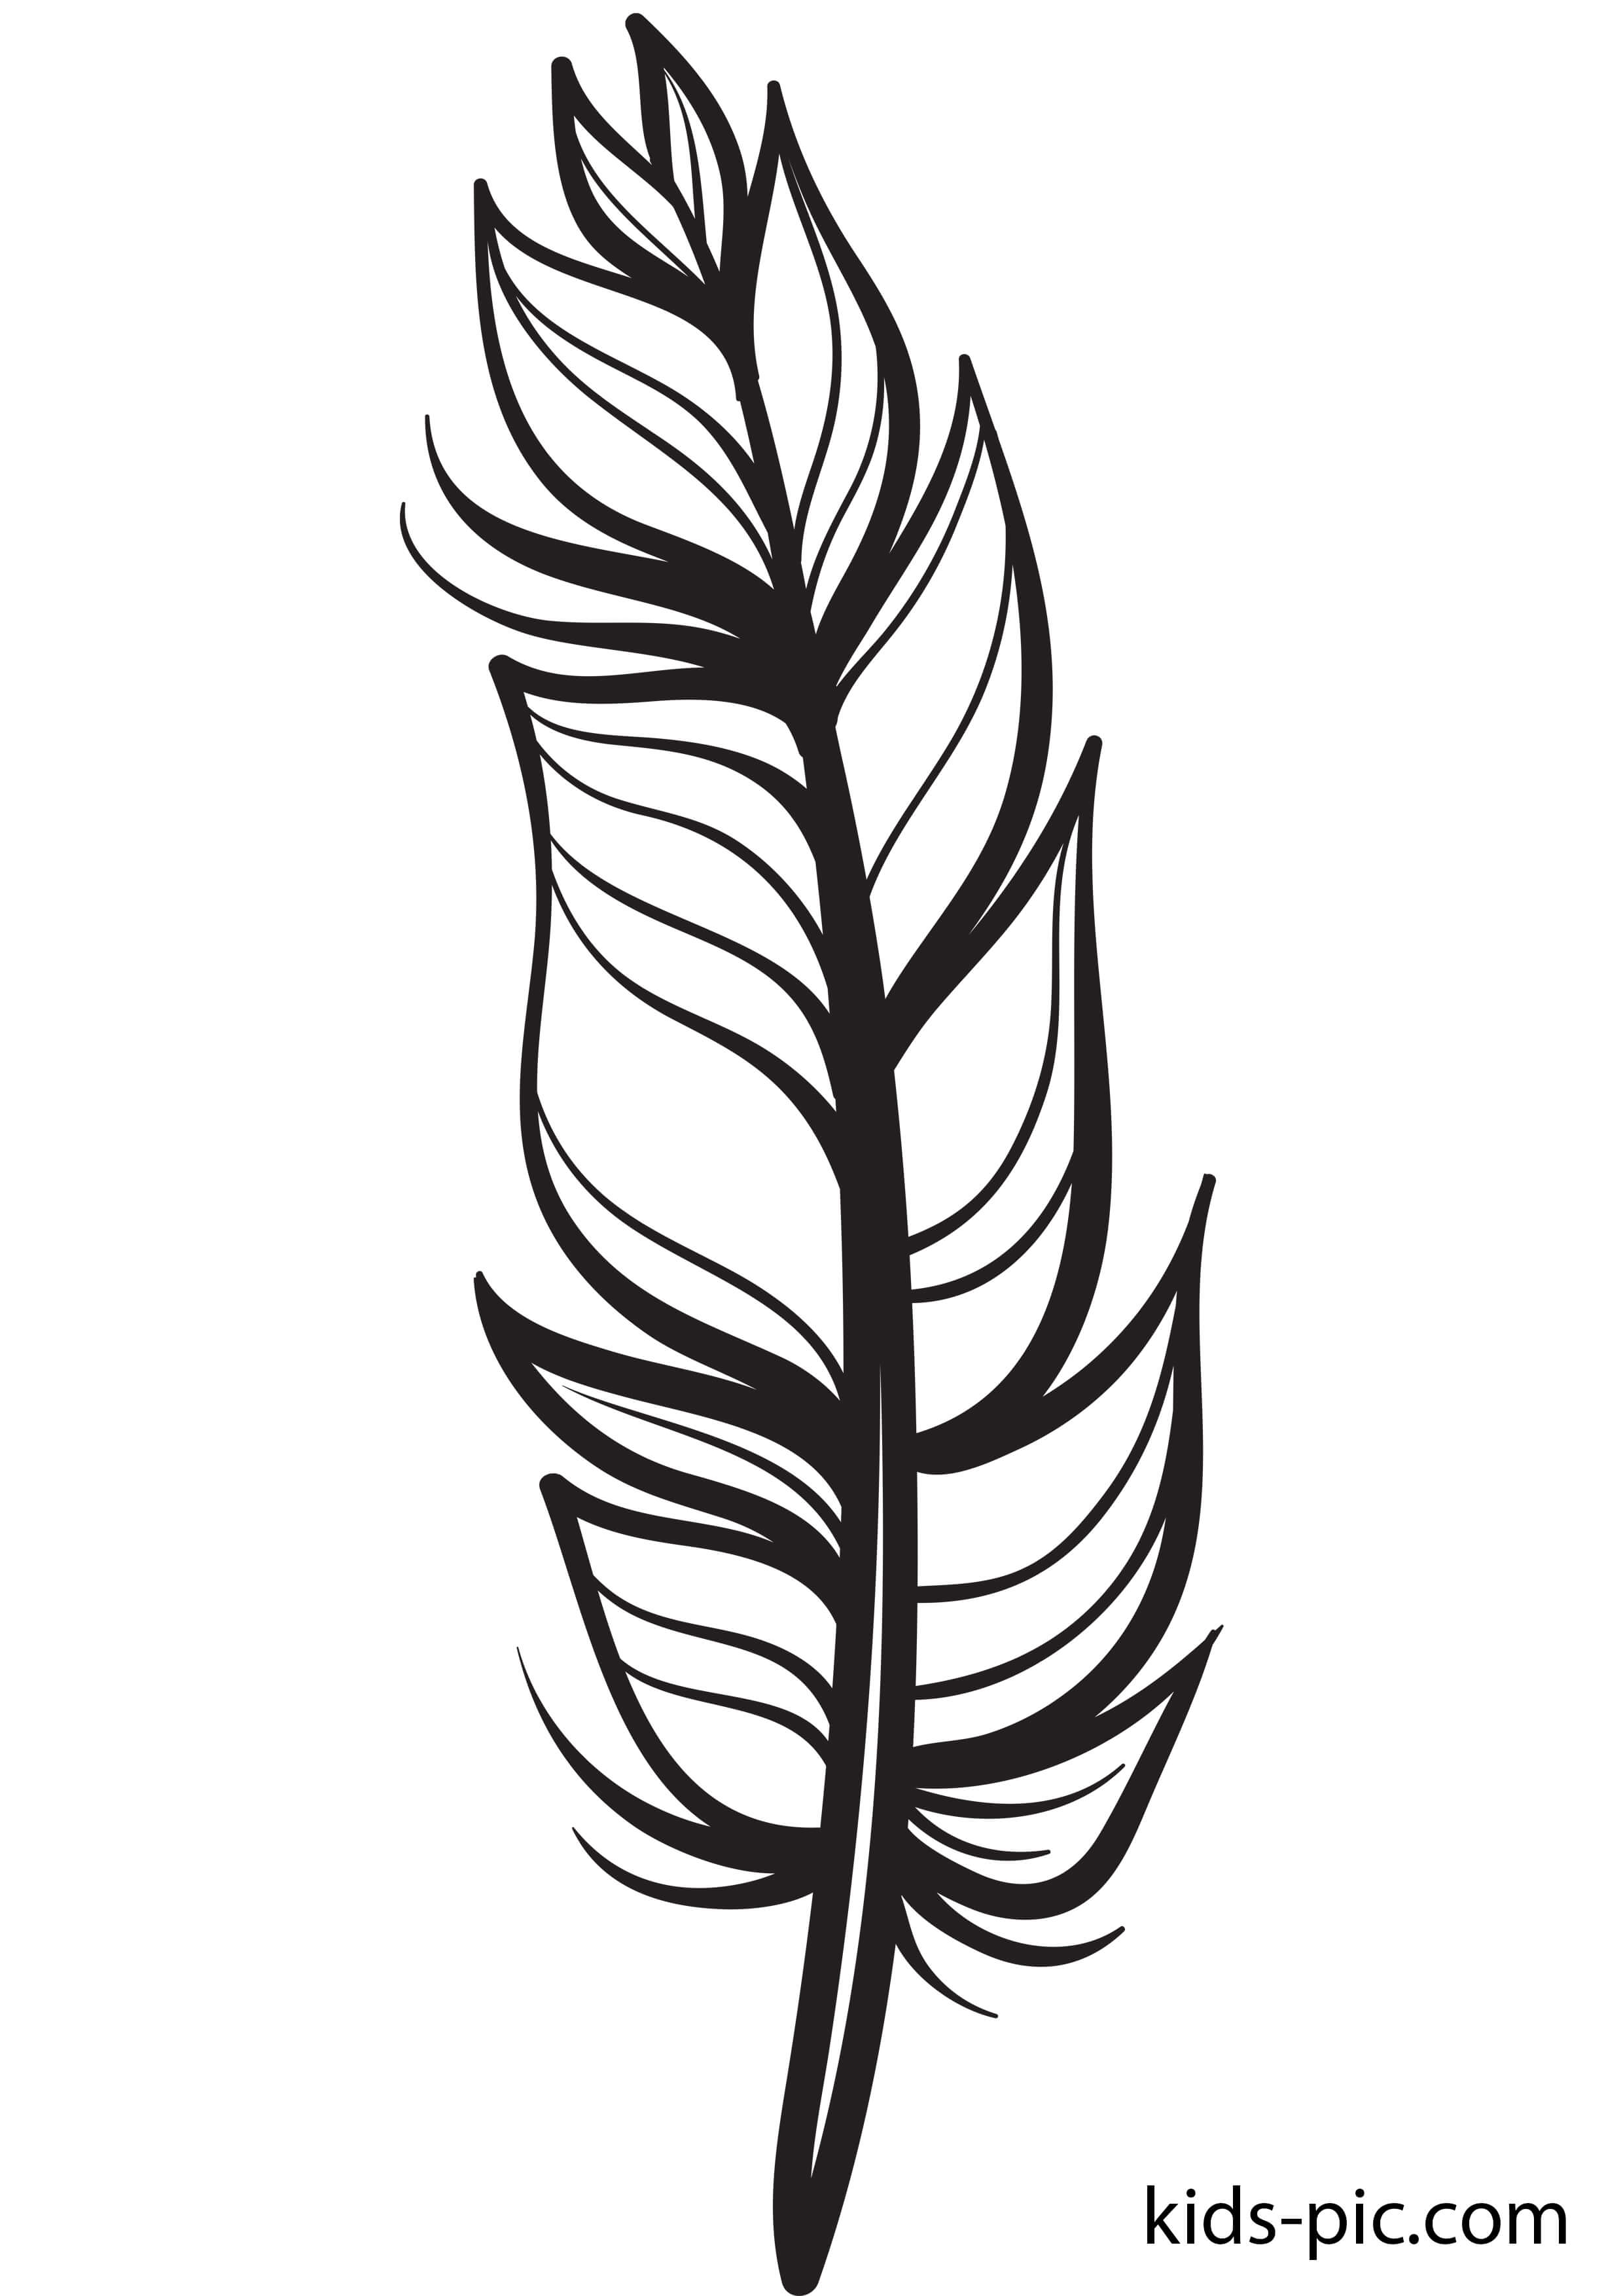 Bird Feather Coloring Pages Kids Pic Com